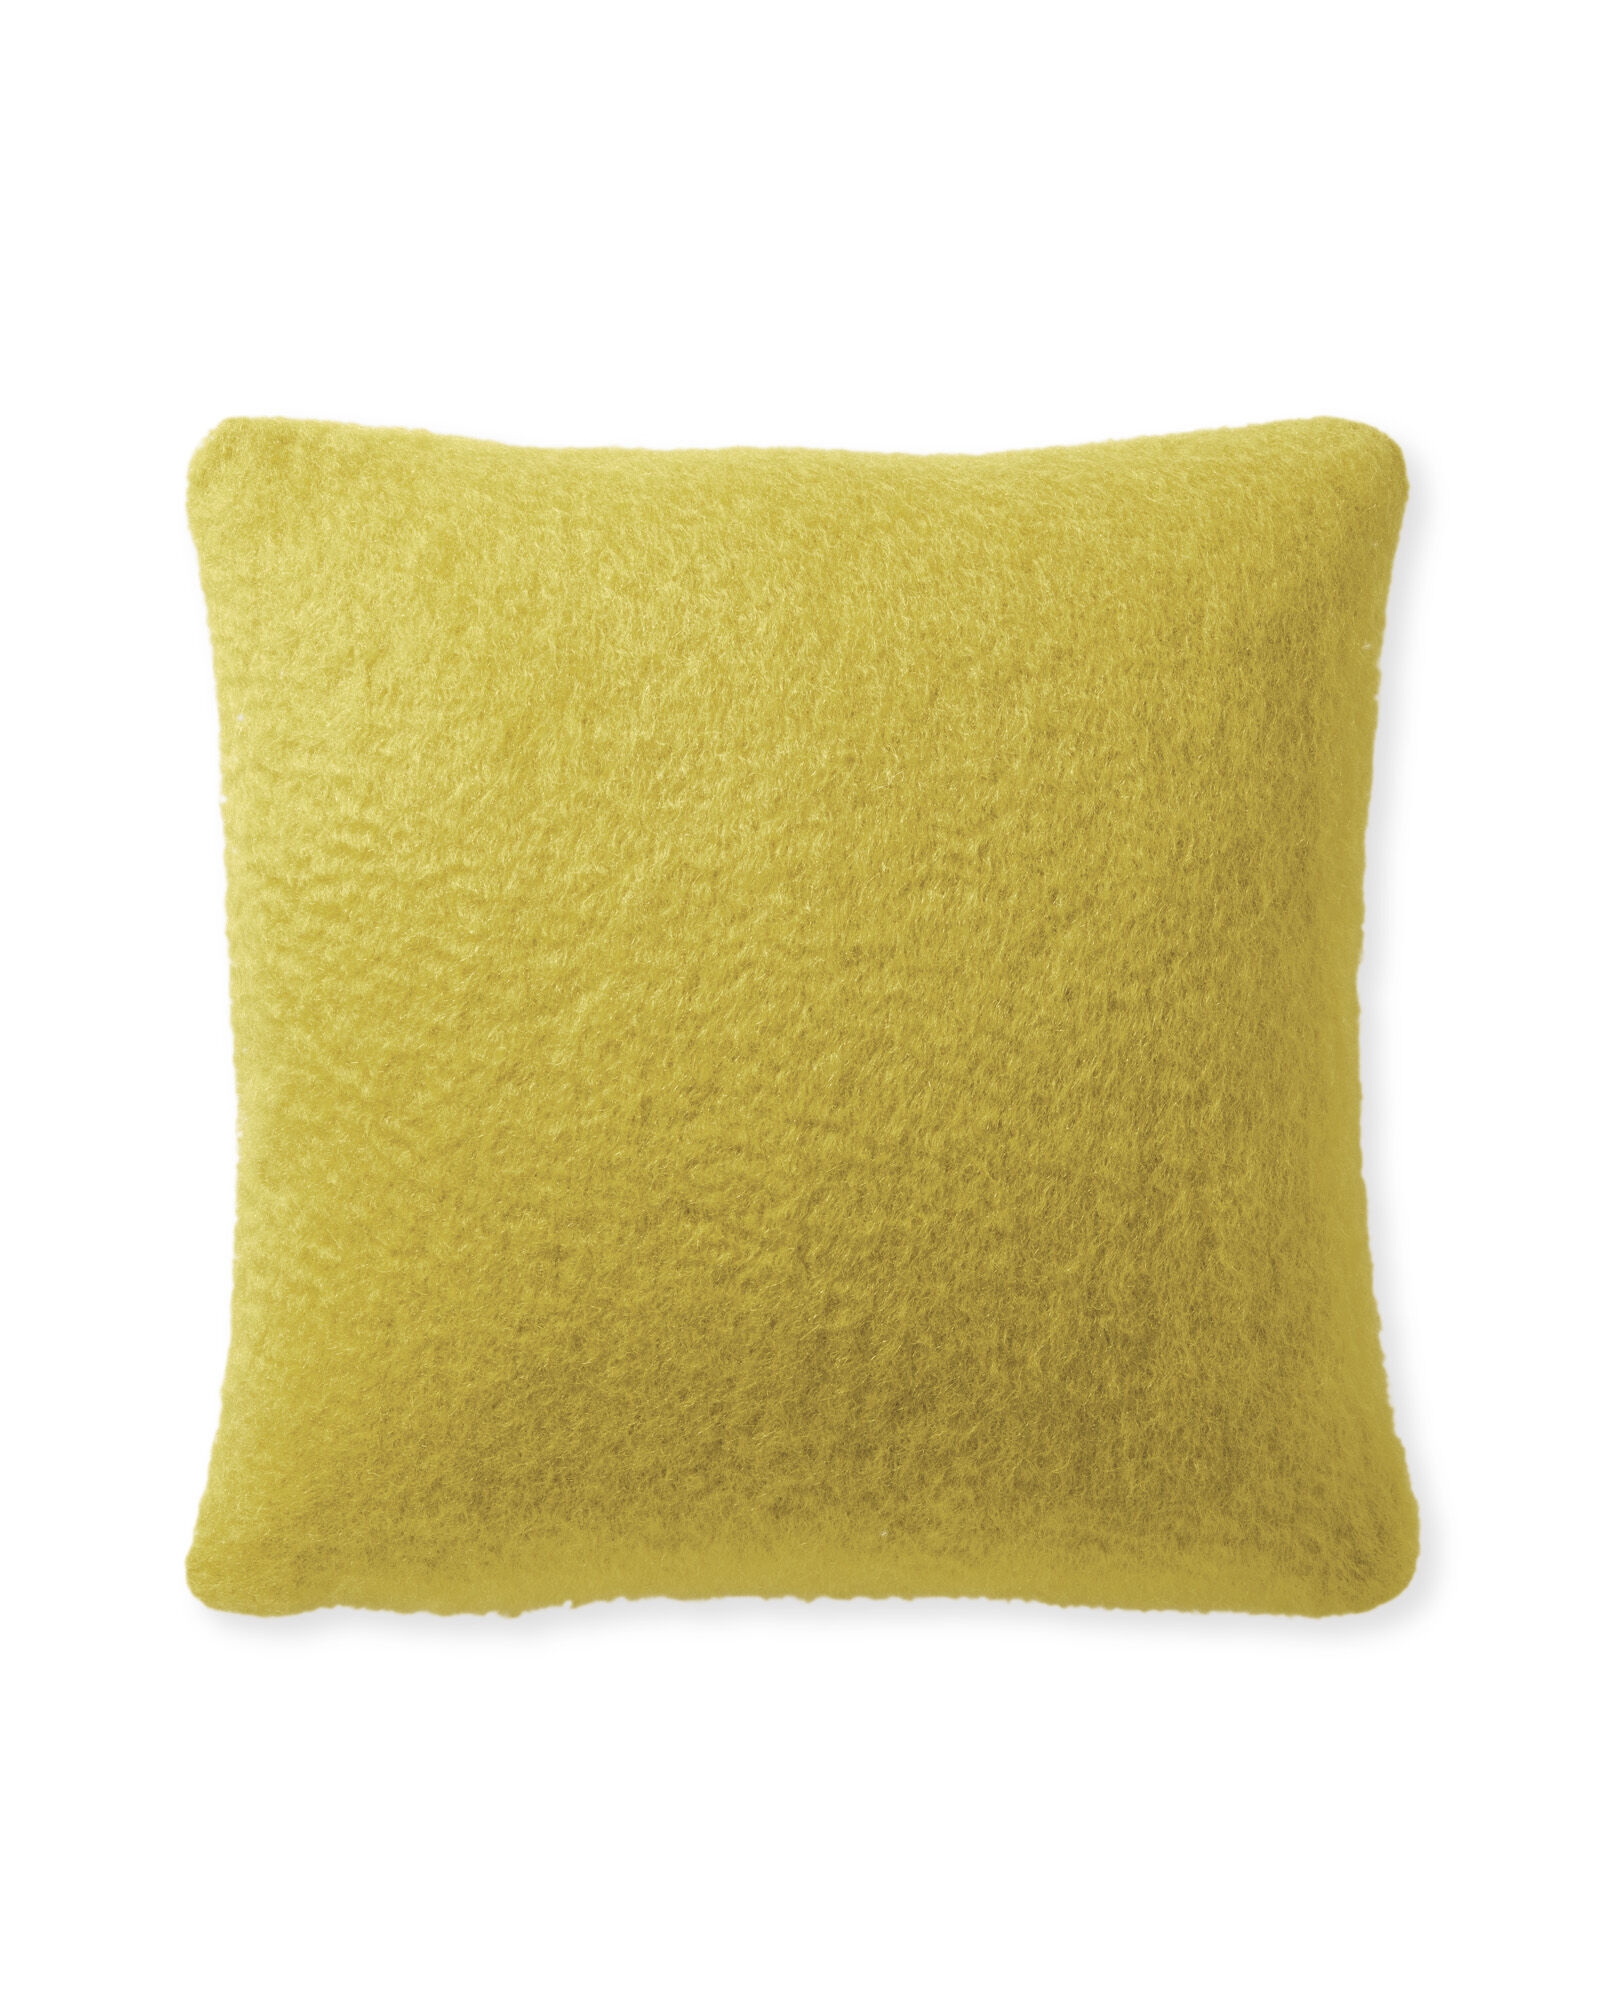 Albion Pillow Cover - Image 0